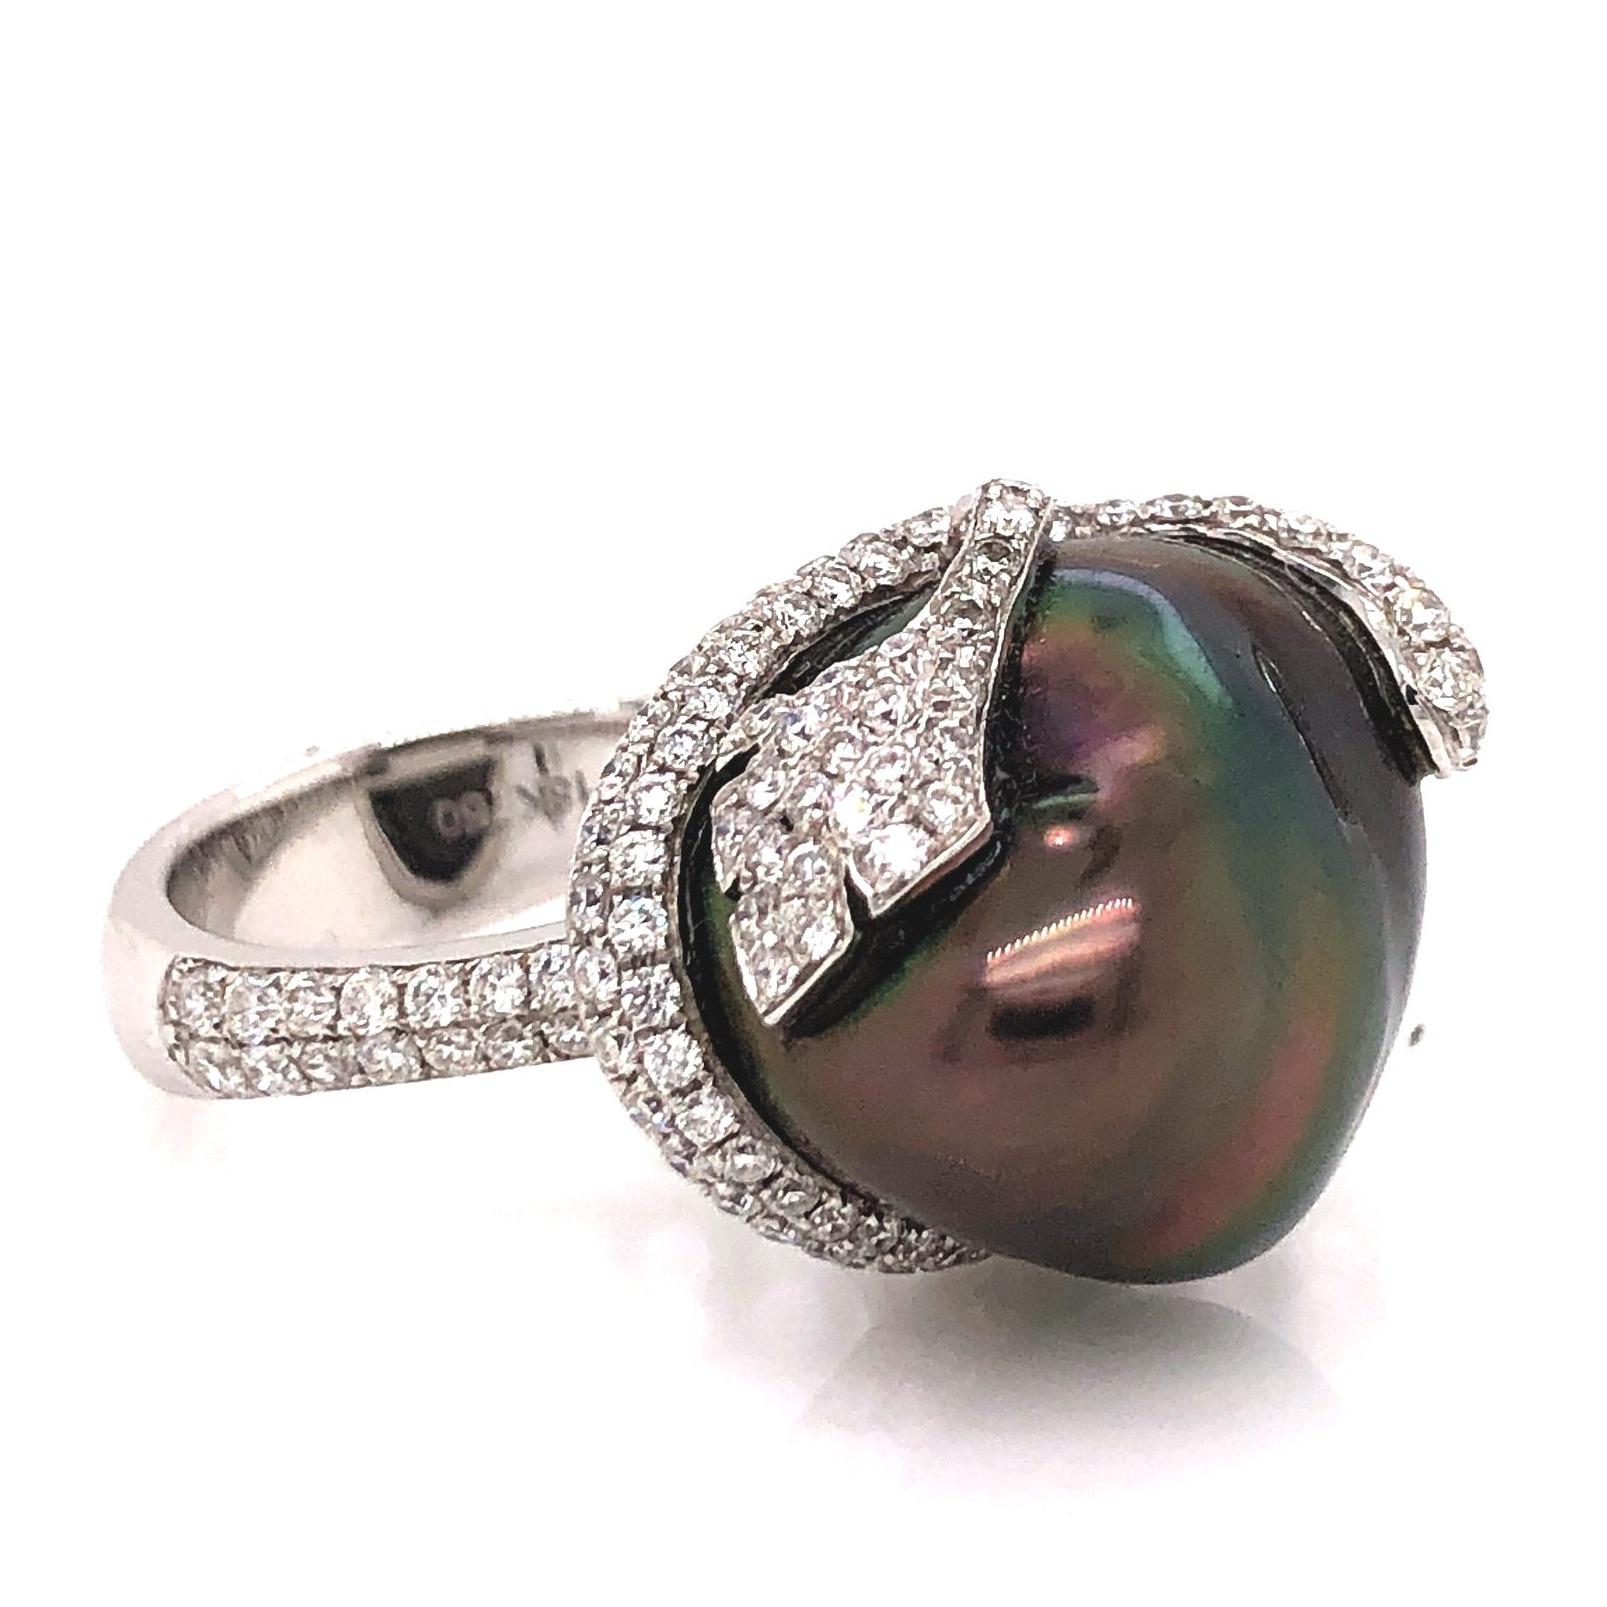 Crafted with precision and expertise, this ASBA Collection Ring boasts a stunning AAA grade Tahitian Keshi Pearl with excellent nacre and luster. It is elegantly surrounded by 1.29 ct. tw. of F Color, VS1 clarity pavé diamonds, all set in a 14k